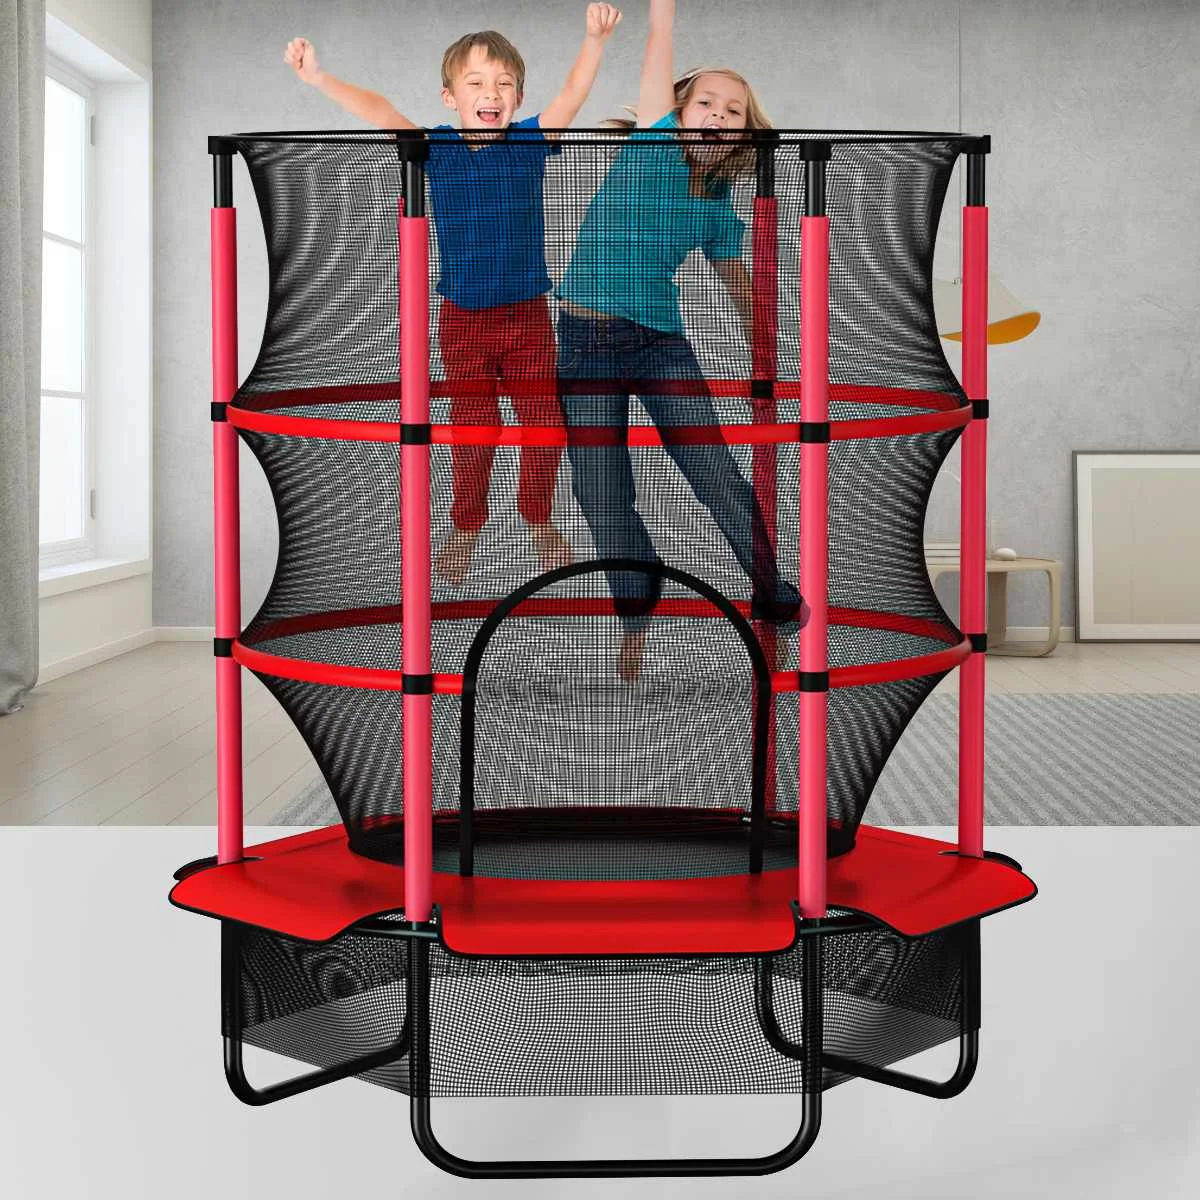 140/160CM Indoor Trampoline with Protection Net Jumping Bed Outdoor Trampolines Exercise Bed Fitness Equipment Adult Children